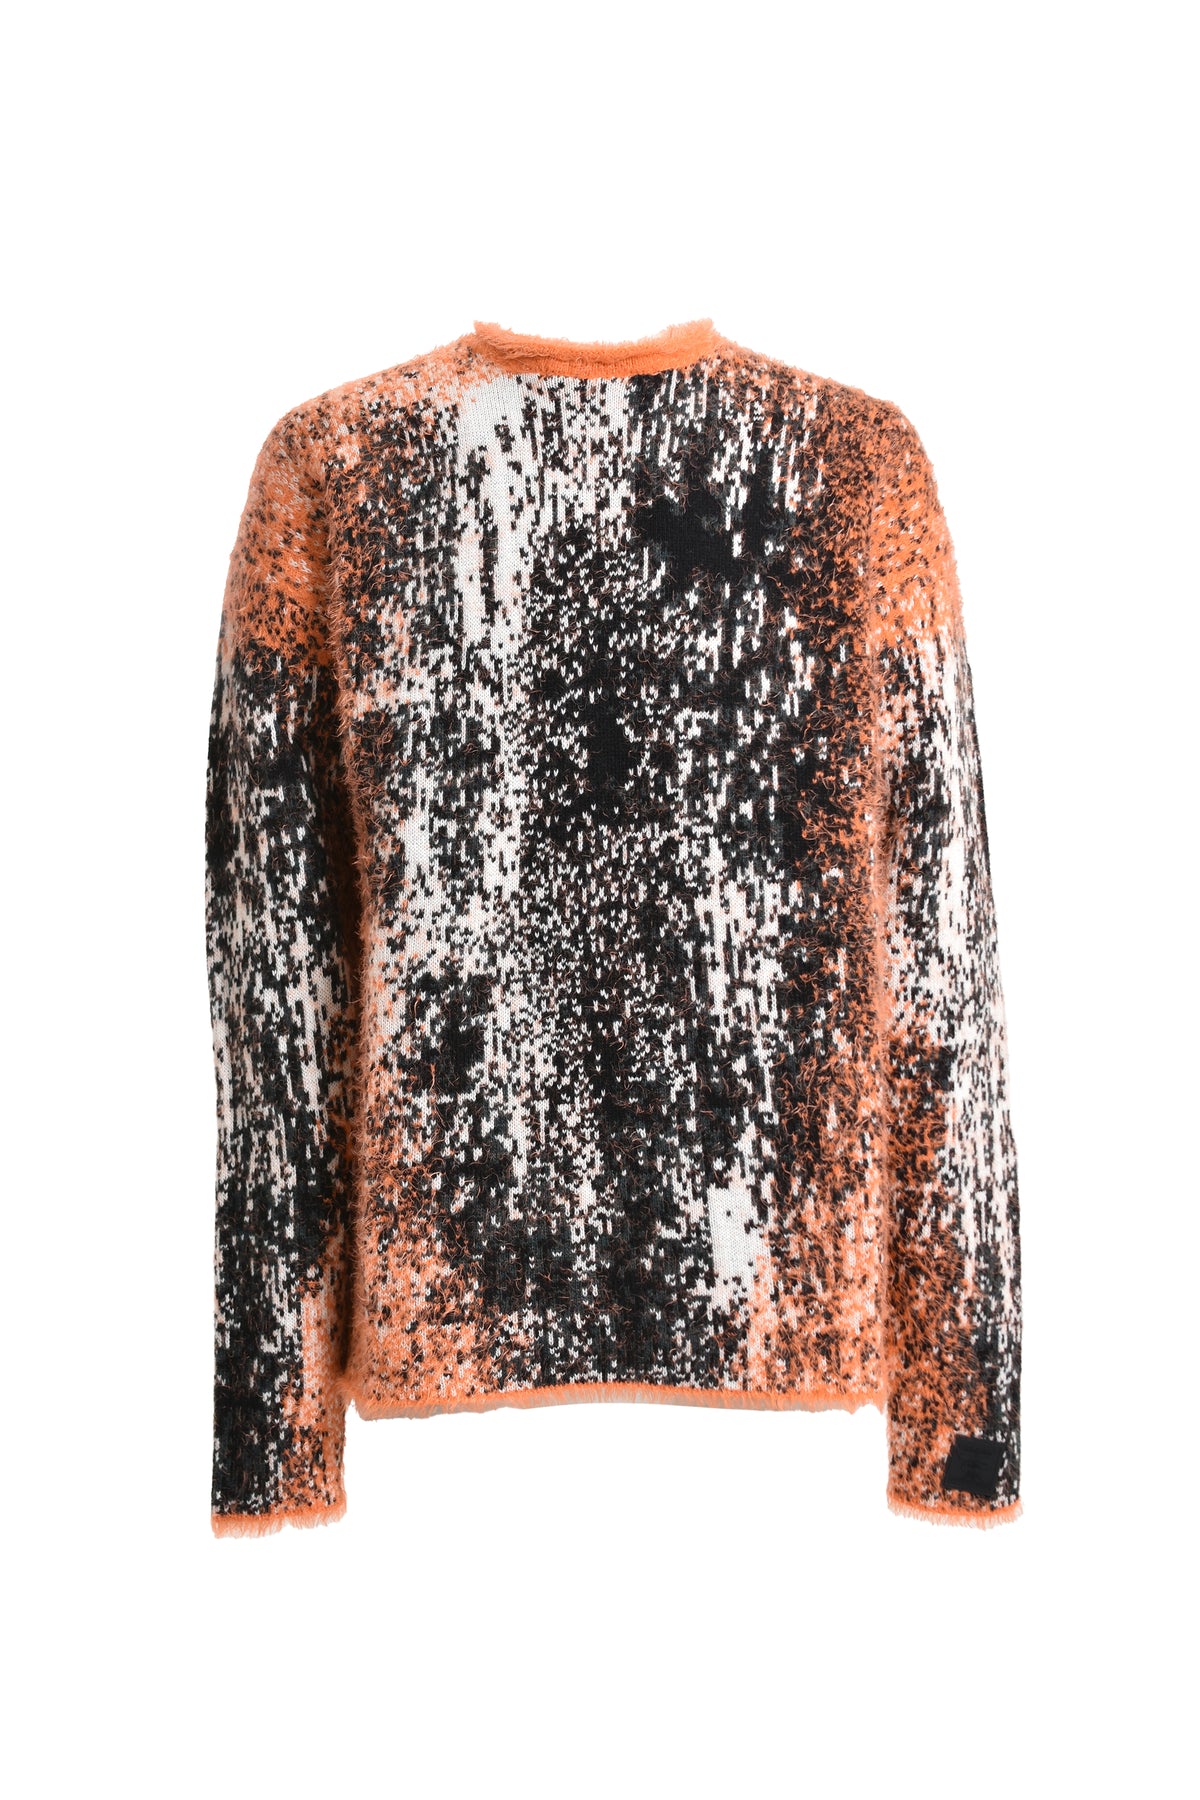 GRADIENT HAIRY KNIT SWEATER / ORG WHT BLK